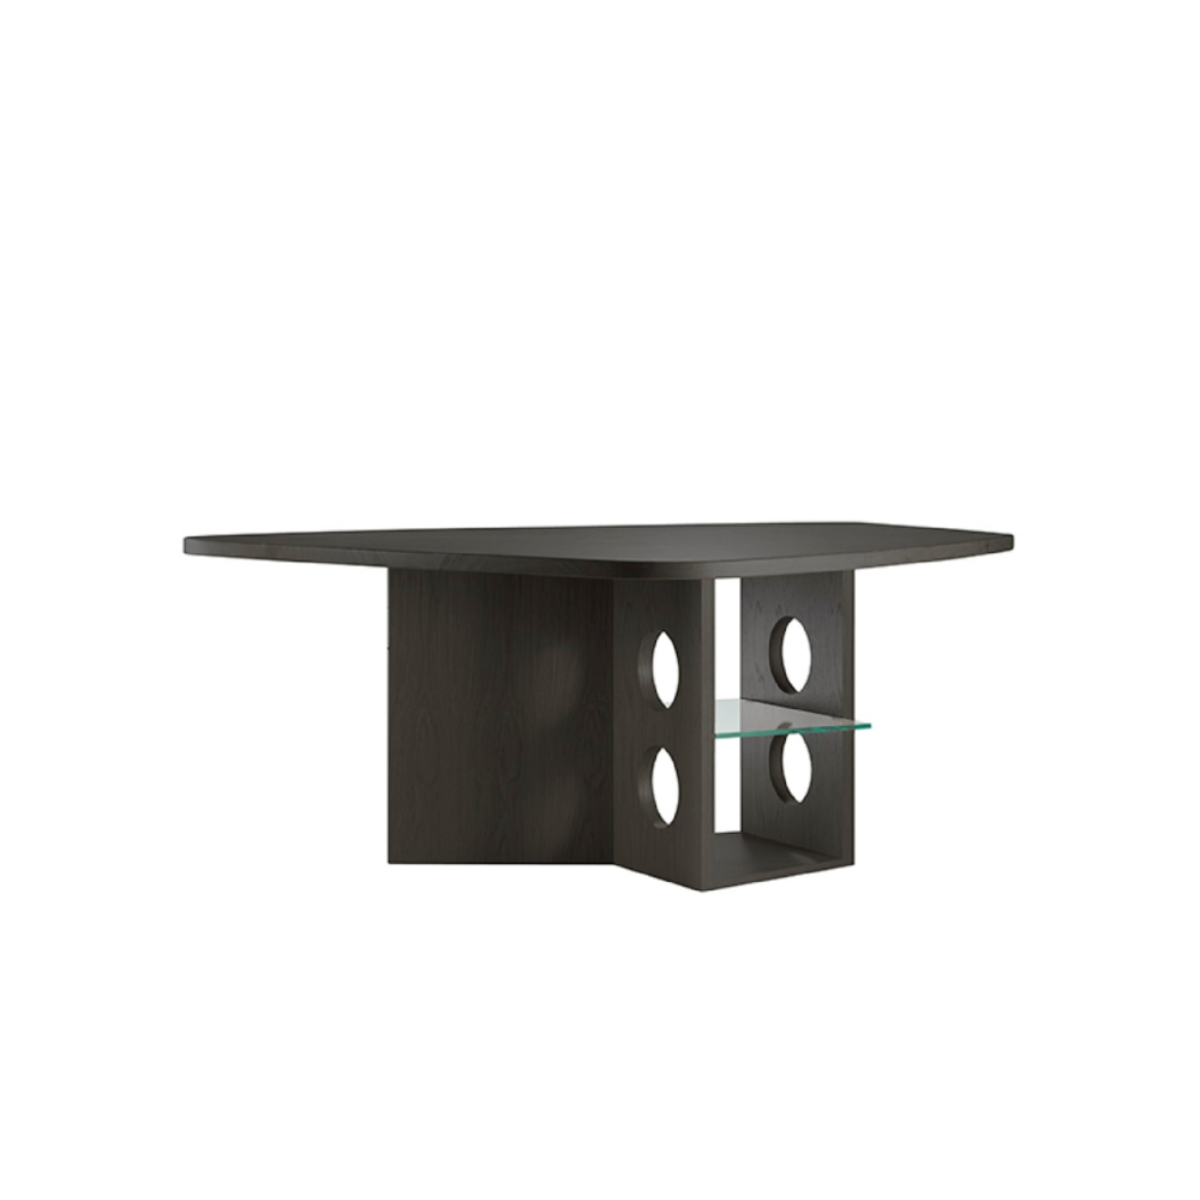 TECTA [GIFT] M21-1 Dining, Conference or Executive Desk - Lacquered Black